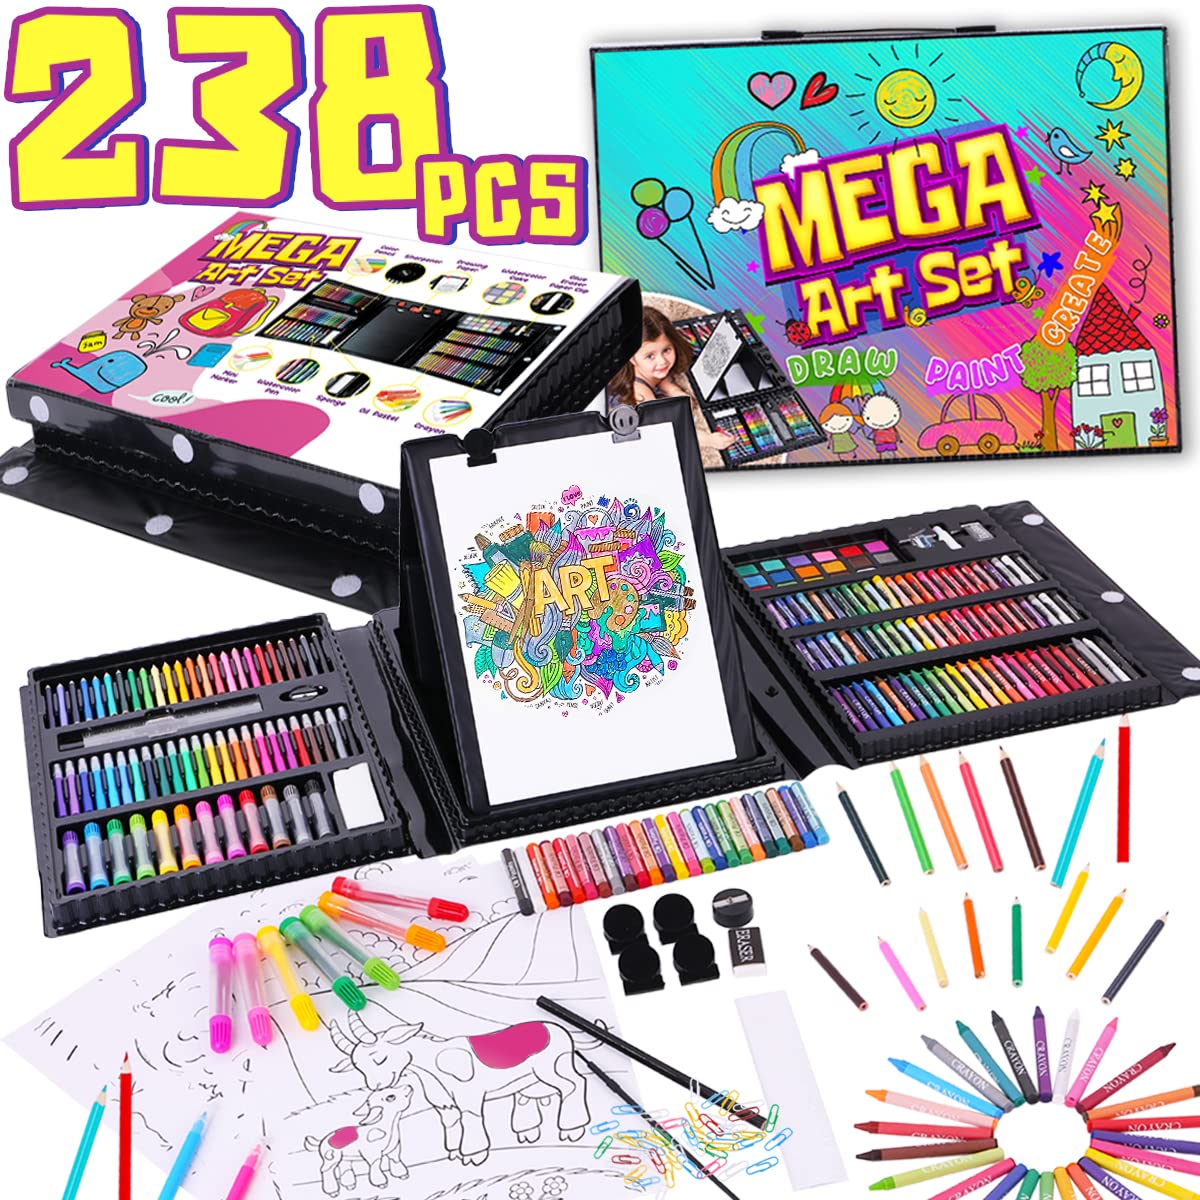 Art Supplies,208 Pack Art Set Drawing Kit for Girls Boys Artist, Deluxe  Gift Art Box with Trifold Easel,Includes Oil Pastels, Crayons, Colored  Pencils, Coloring Book, Scissors, Origami Paper 40 Sheets - Coupon